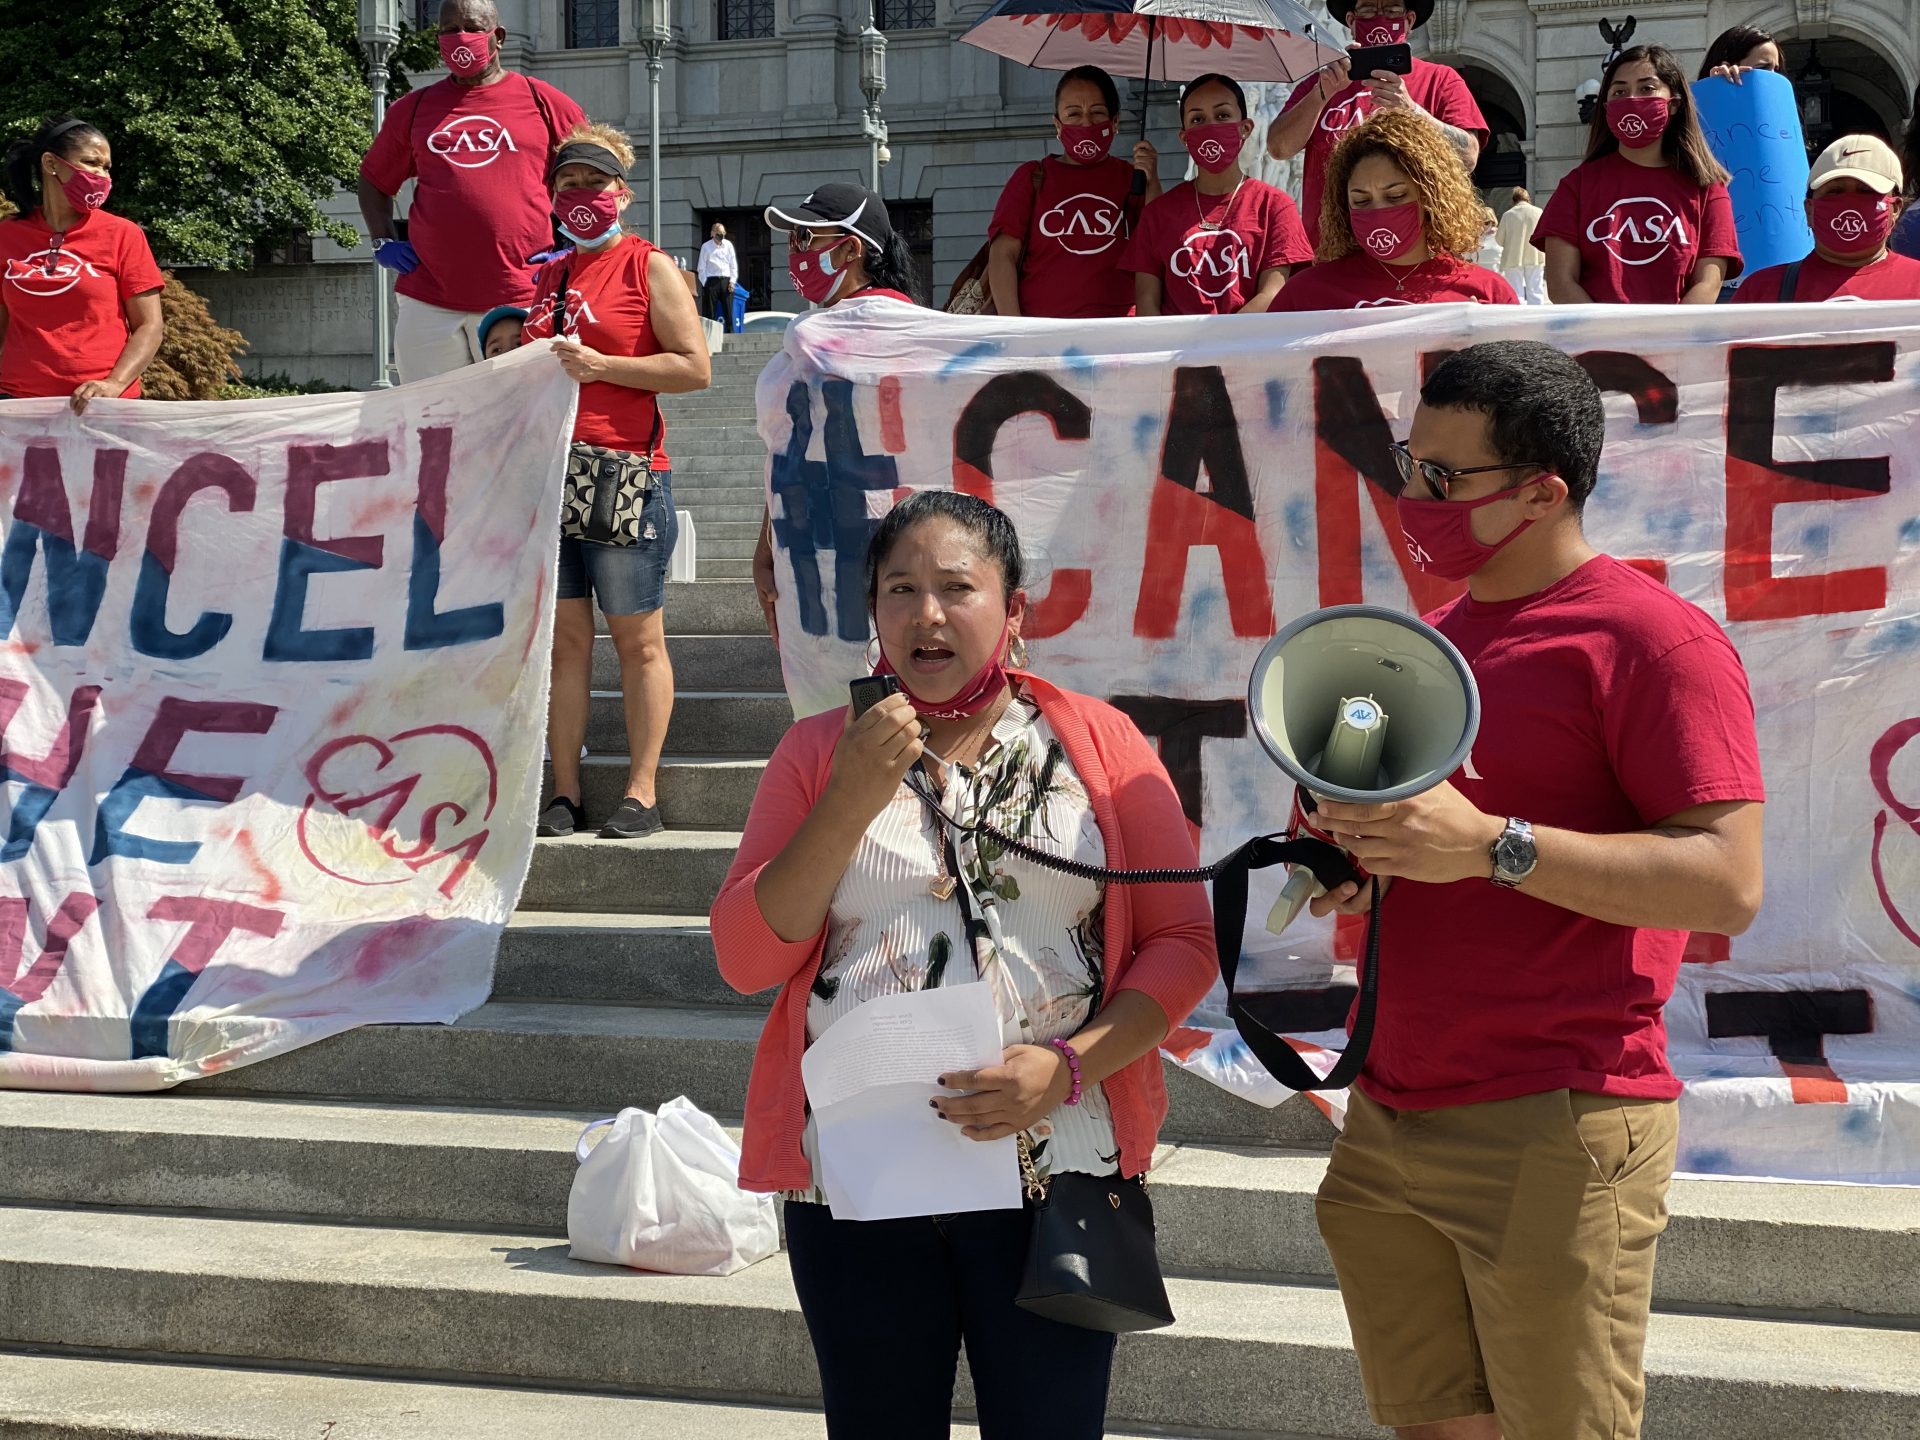 Elvia Gonzalez shared her story about losing work, contracting the coronavirus and struggling to pay rent during the pandemic Wednesday on the Capitol building steps. (Anthony Orozco/WITF)